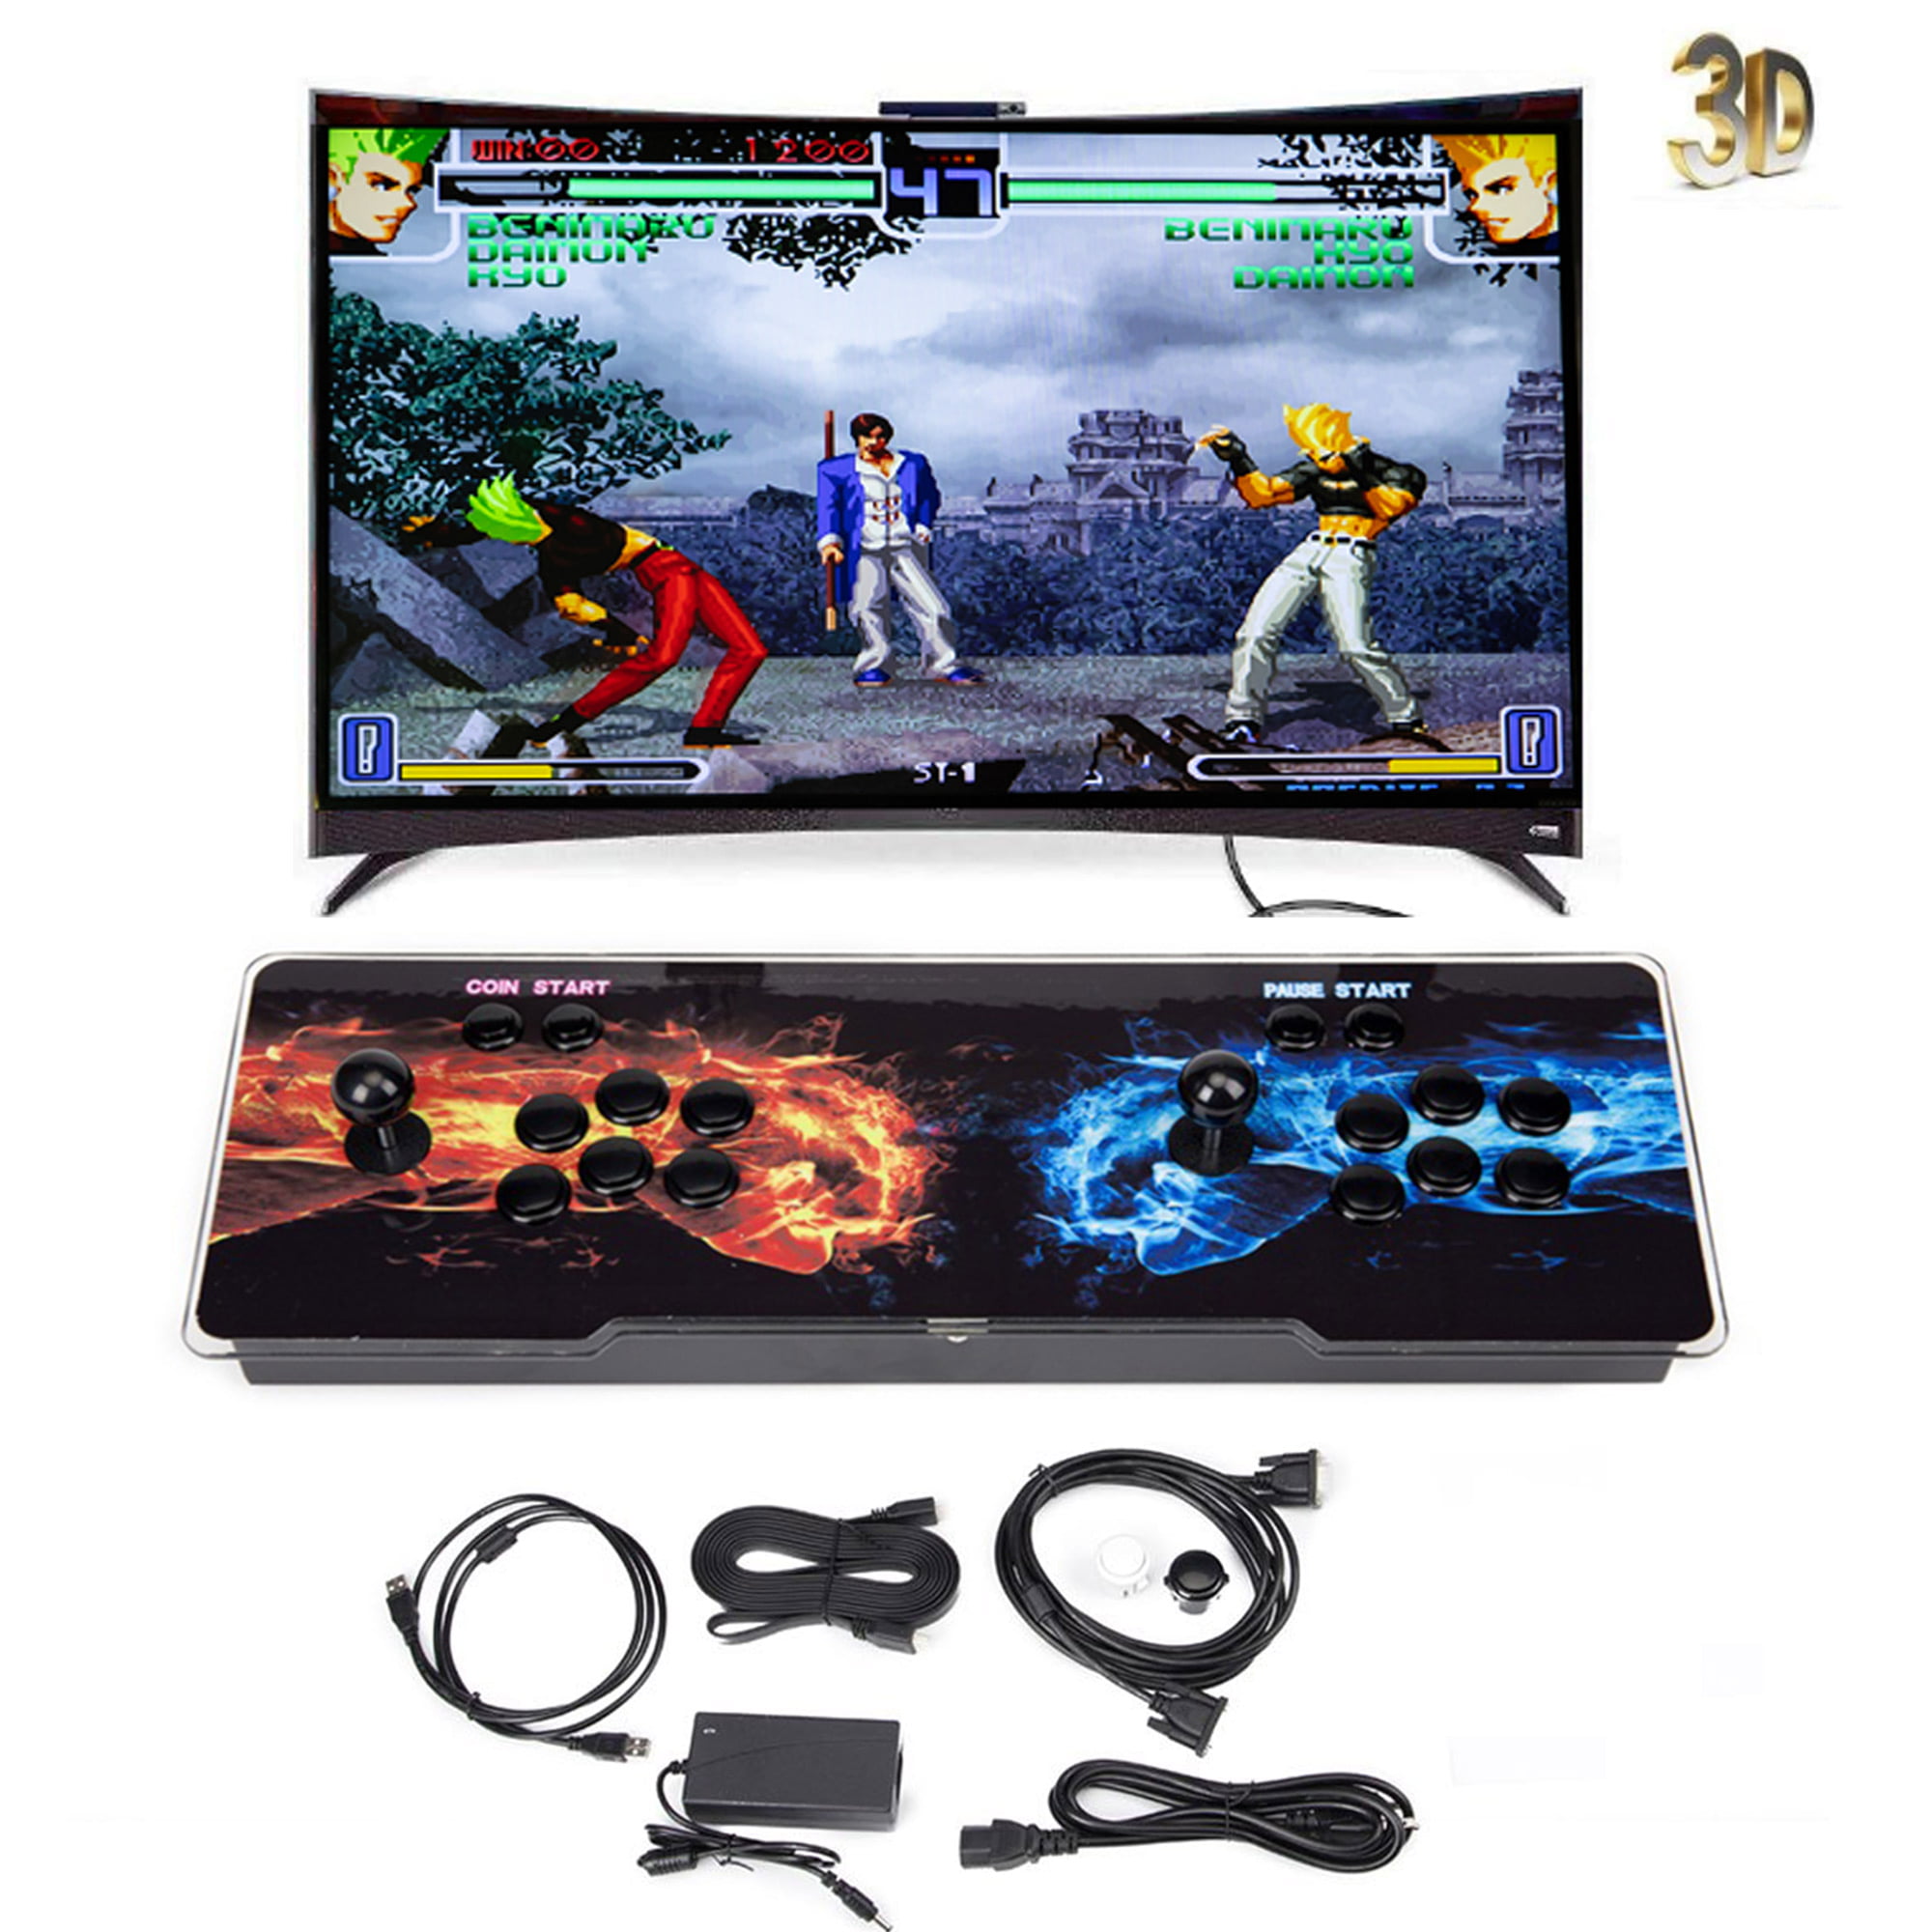  Uiexer 9800 Games in 1 Pandora's Box, 3D Arcade Game Console,  Retro Game Machine for PC/Projector/TV, 2-4 Players, 1280X720 Full HD, 3D  Games, Search/Hide/Save/Load/Pause Games, Favorite List : Toys & Games